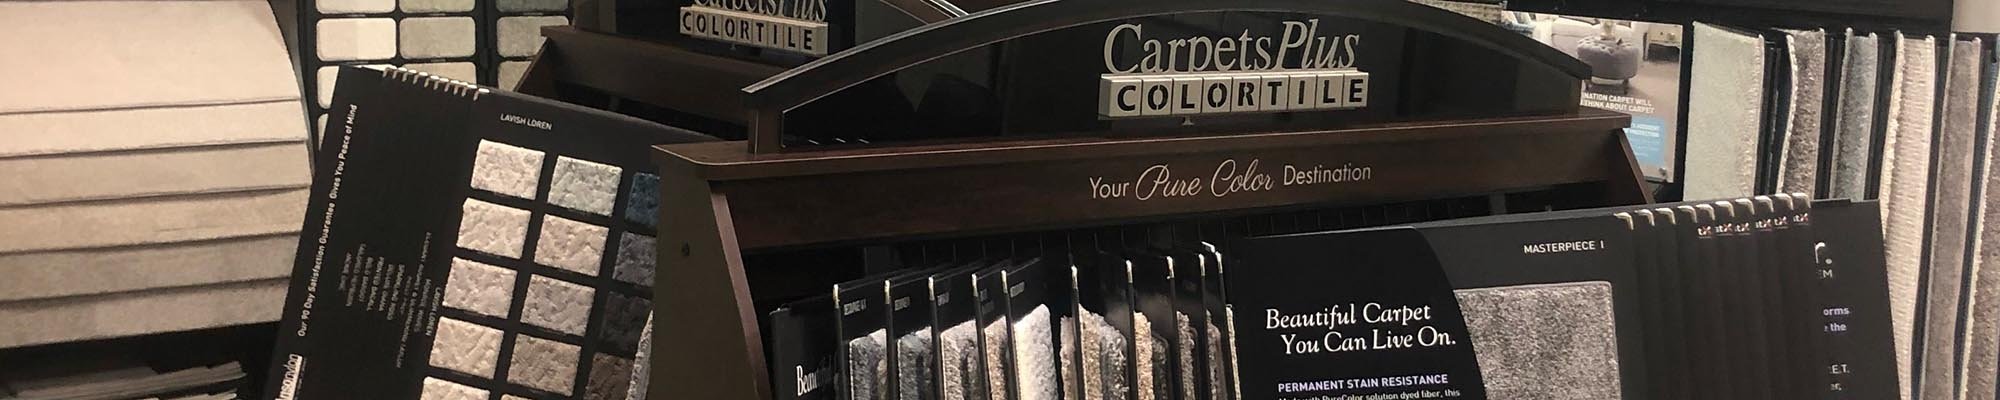 Local Flooring Retailer in Racine, WI - CarpetsPlus COLORTILE of Racine providing a wide selection of flooring and expert advice.